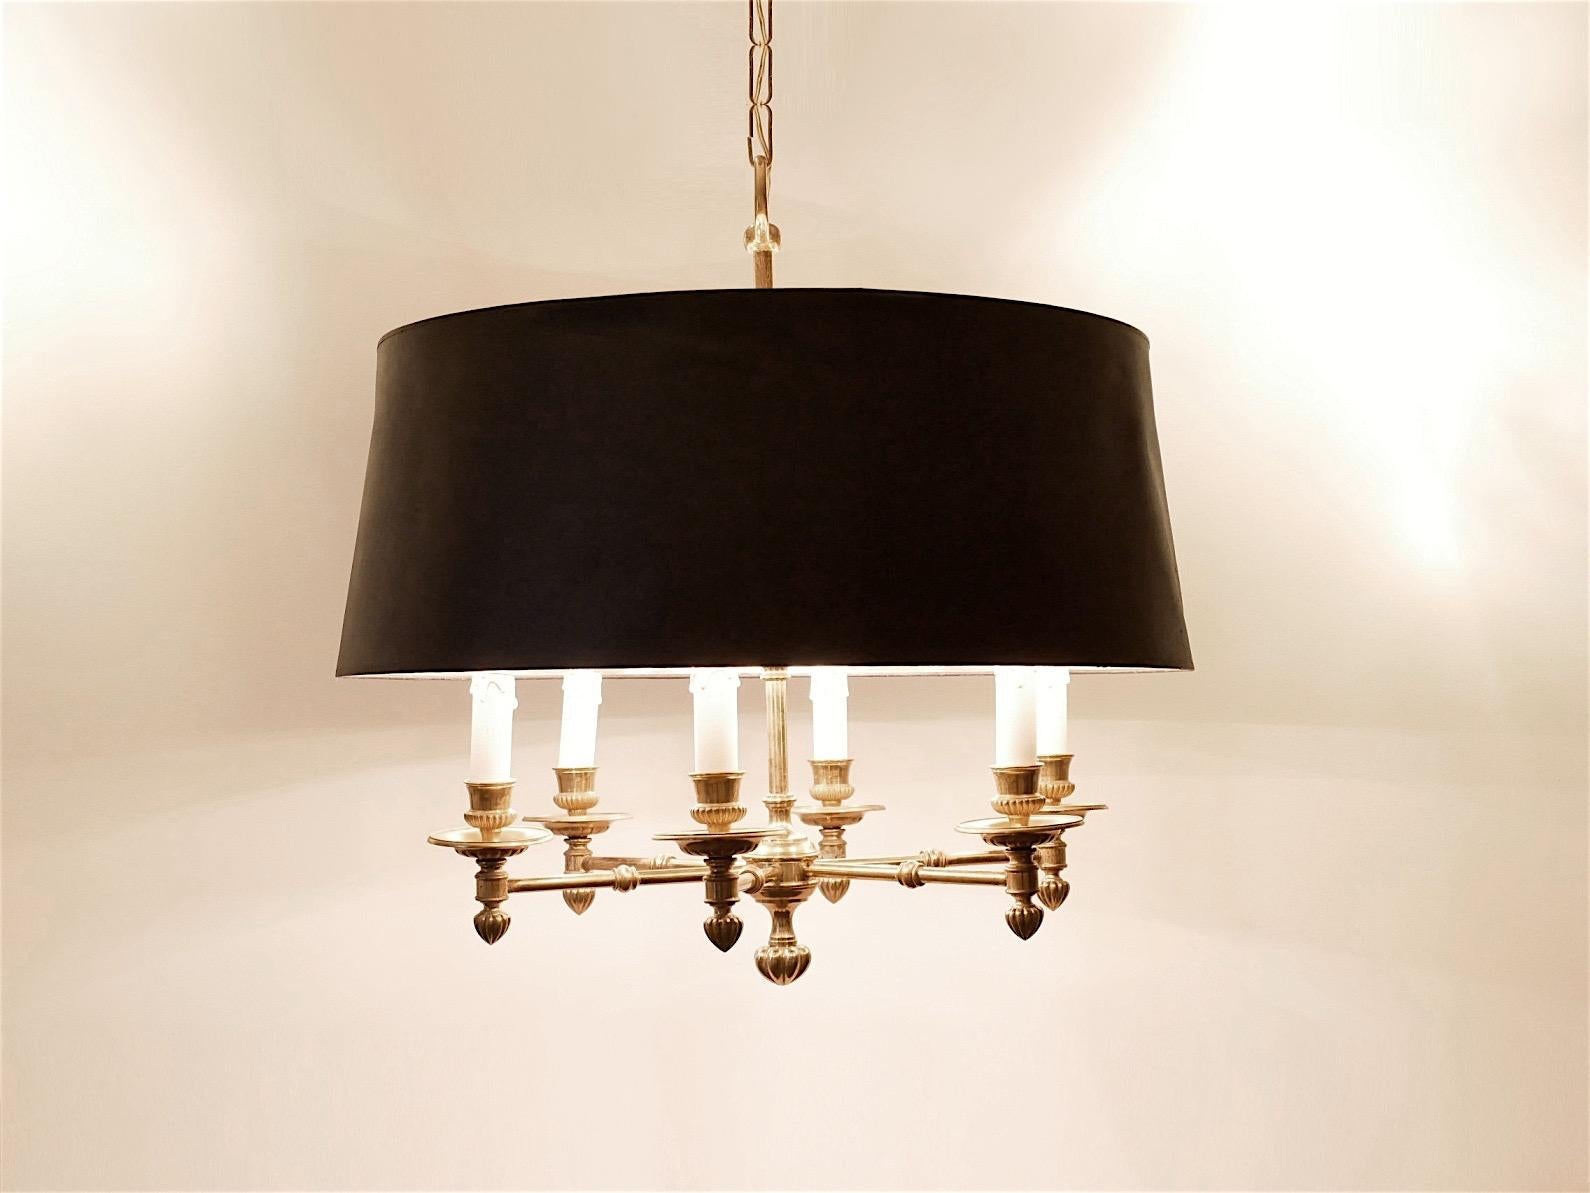 Full brass candelabra style chandelier dating from the 1940s, black textile shade with golden inner.